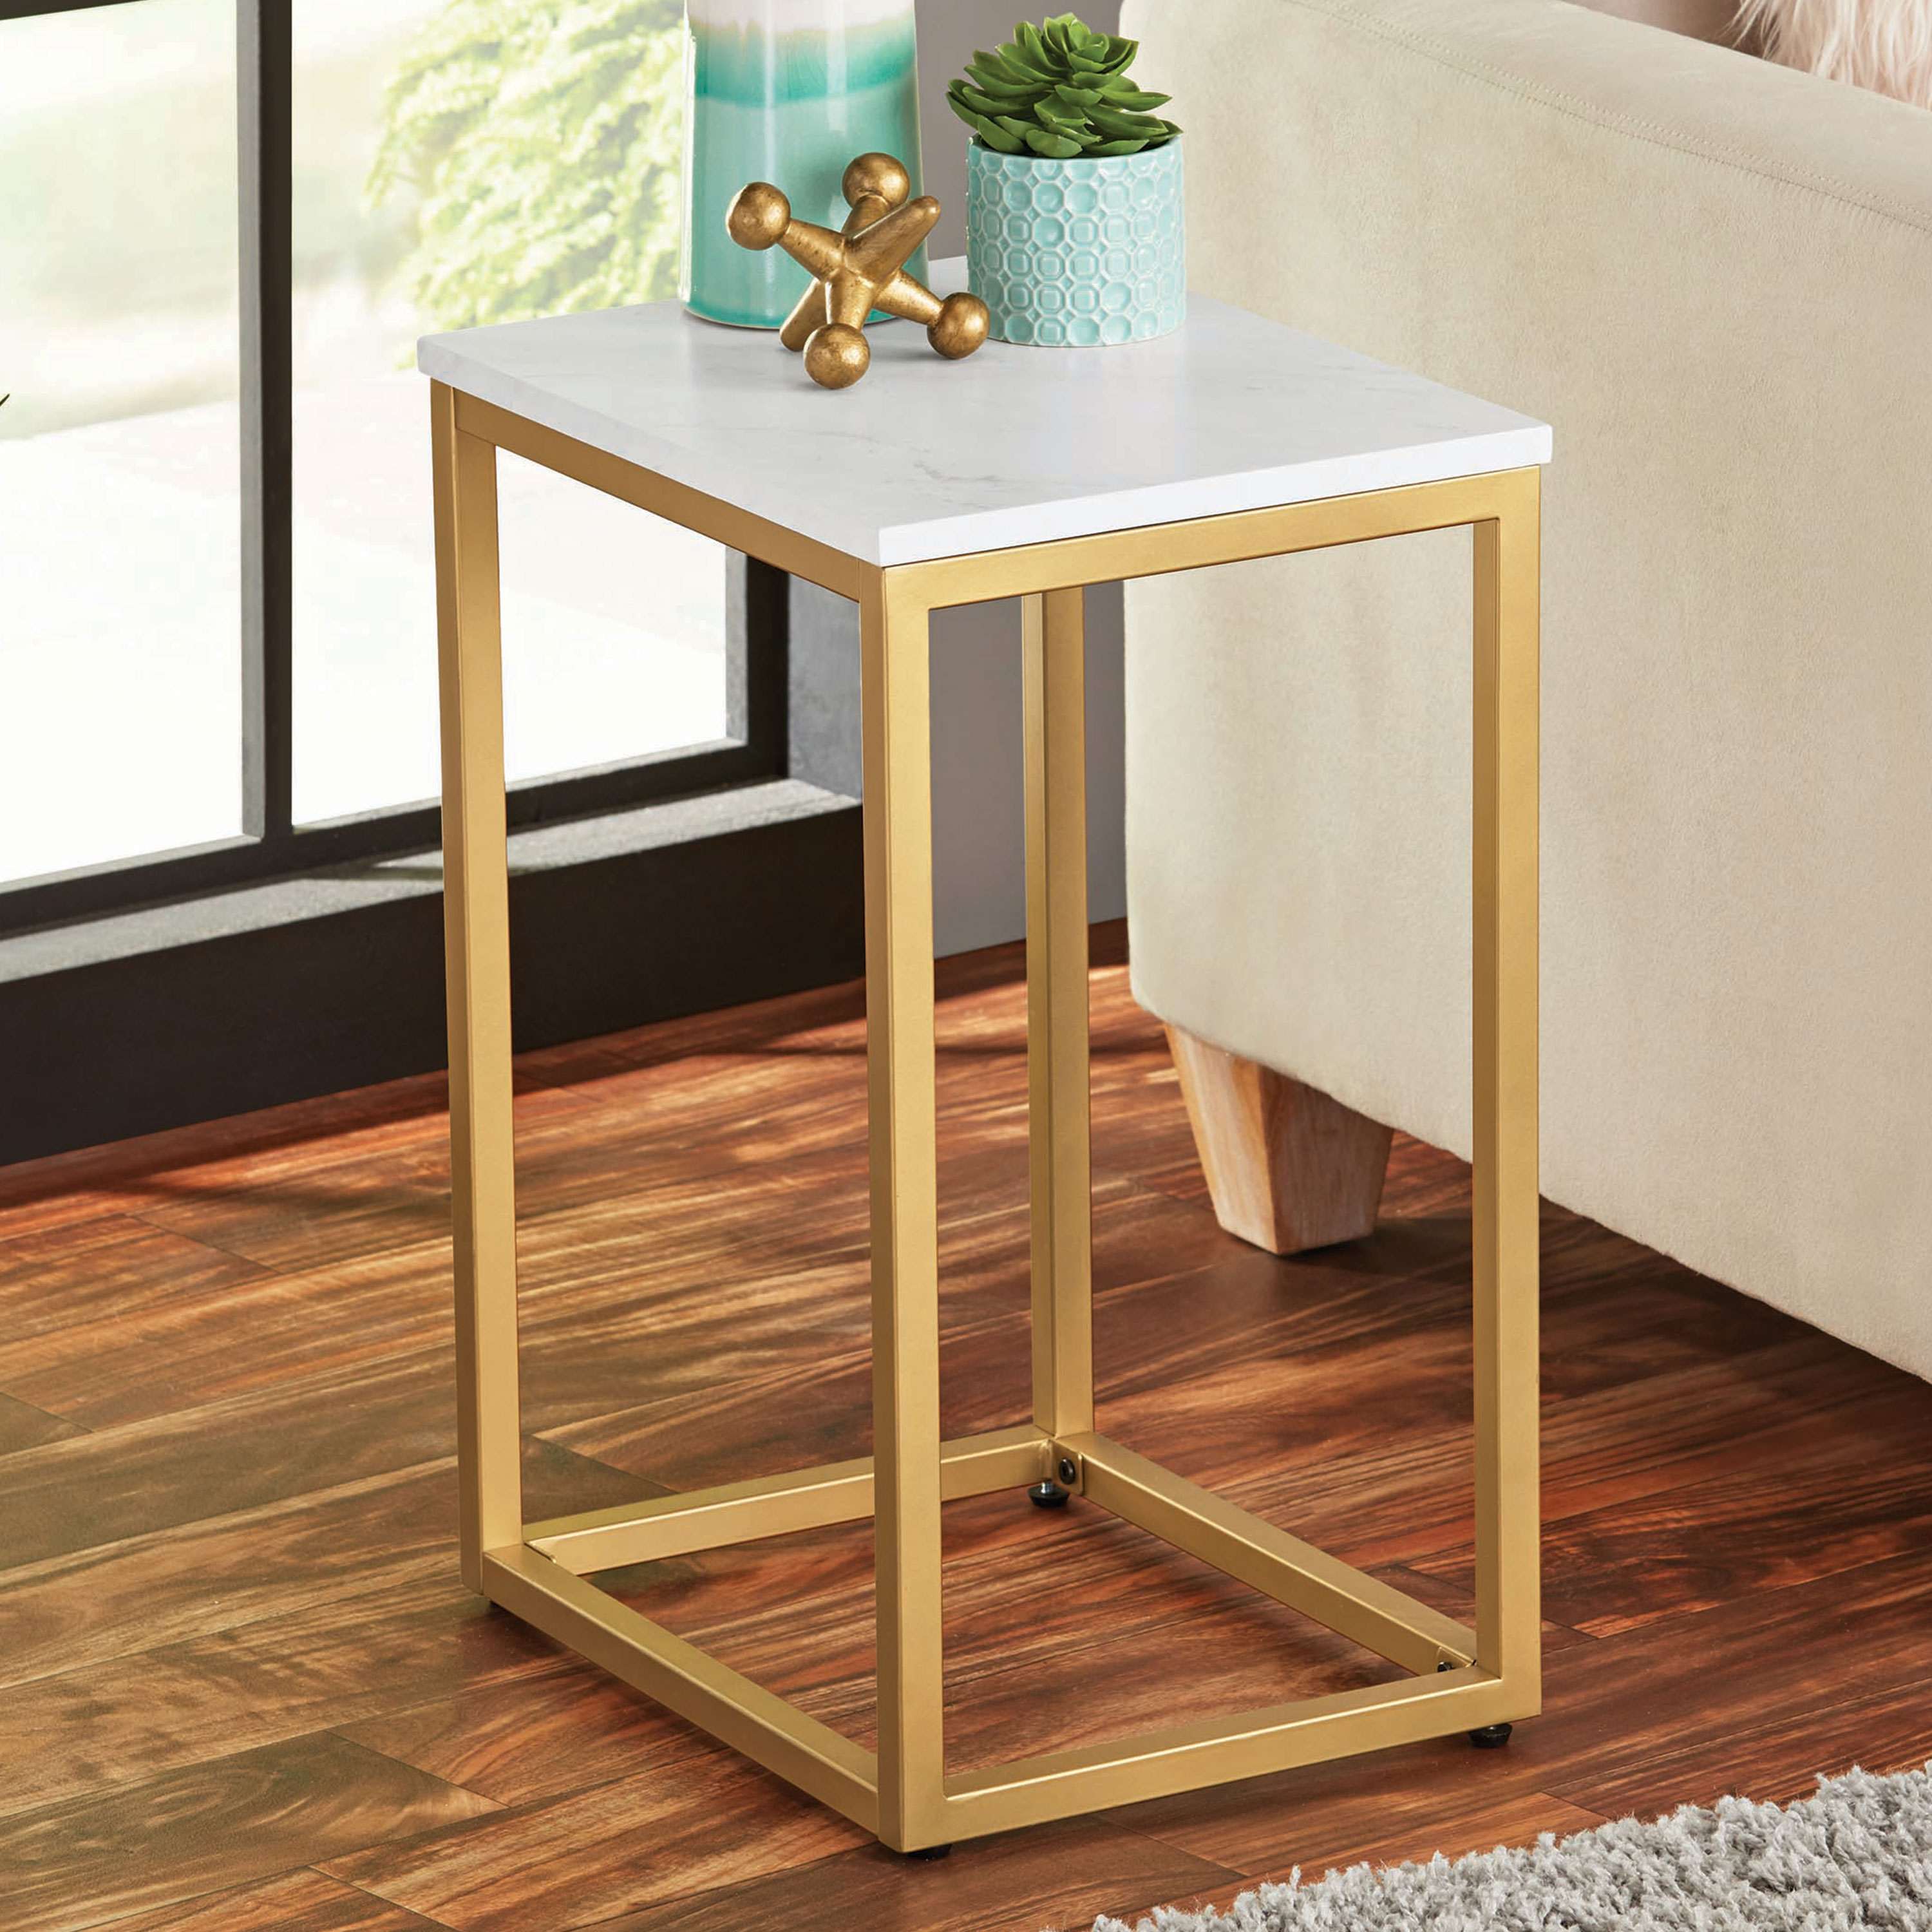 whalen style better homes and gardens mercer accent table vintage oak room organizer rustic brown end tables west elm marble drop leaf desk tro lamps dale tiffany leilani lamp